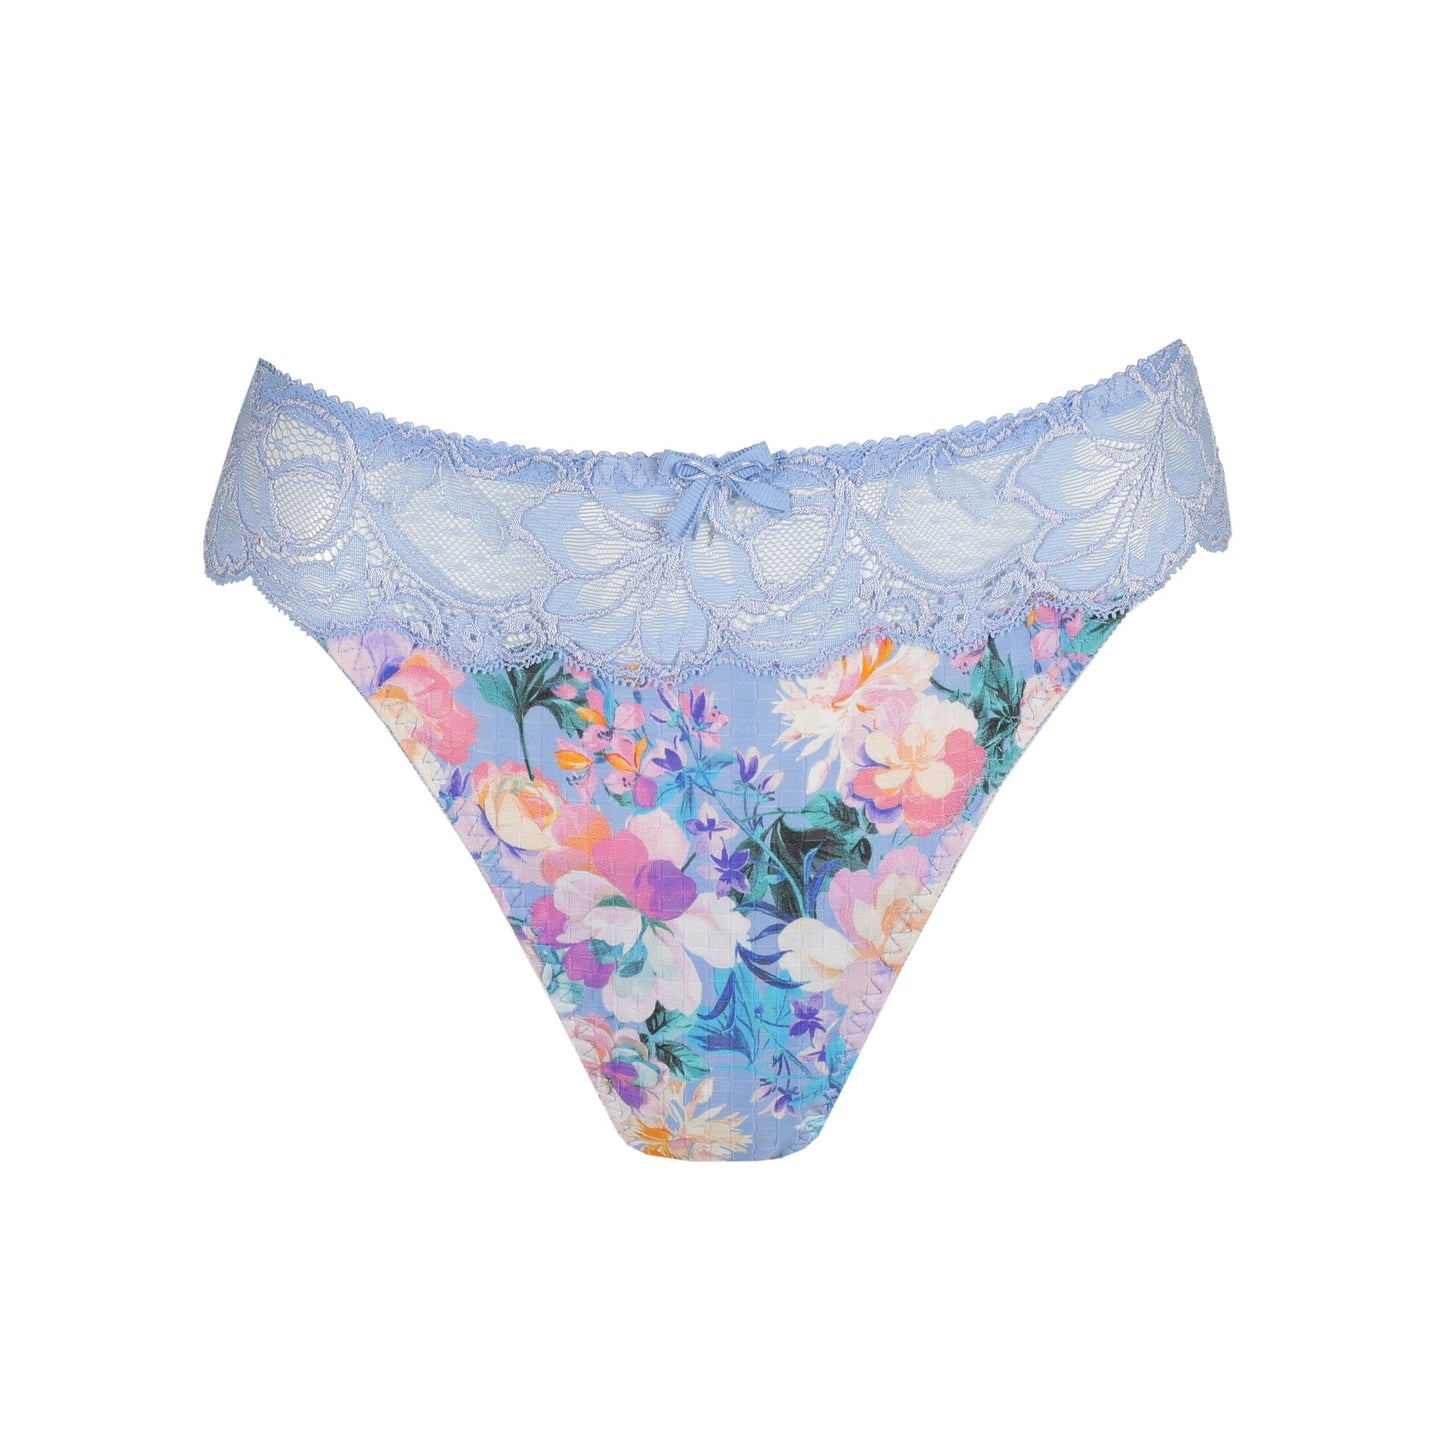 Madison Thong in Periwinkle Floral by PrimaDonna.